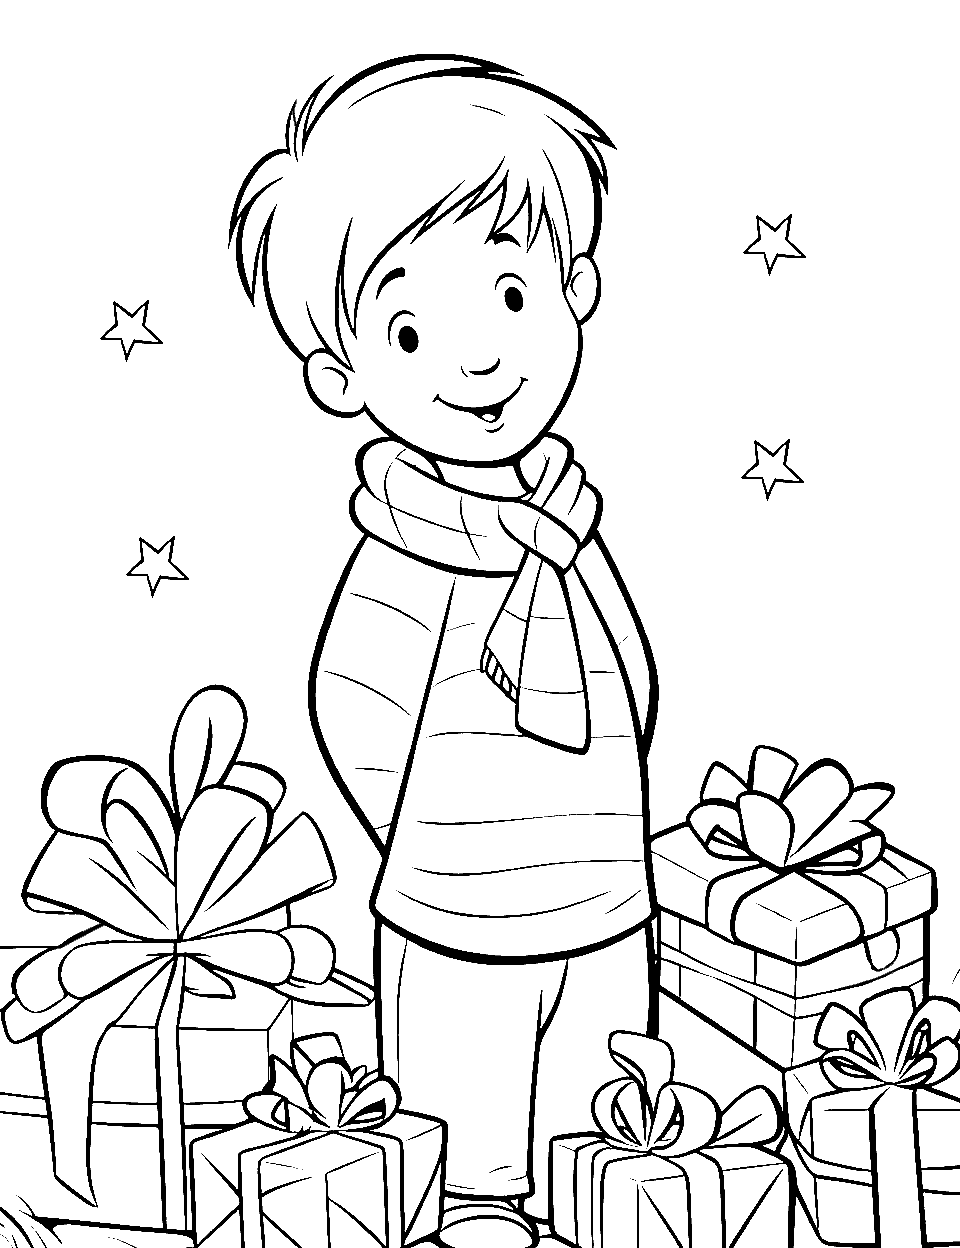 Christmas Morning Presents Coloring Page - Christopher Robin surrounded by wrapped gifts.